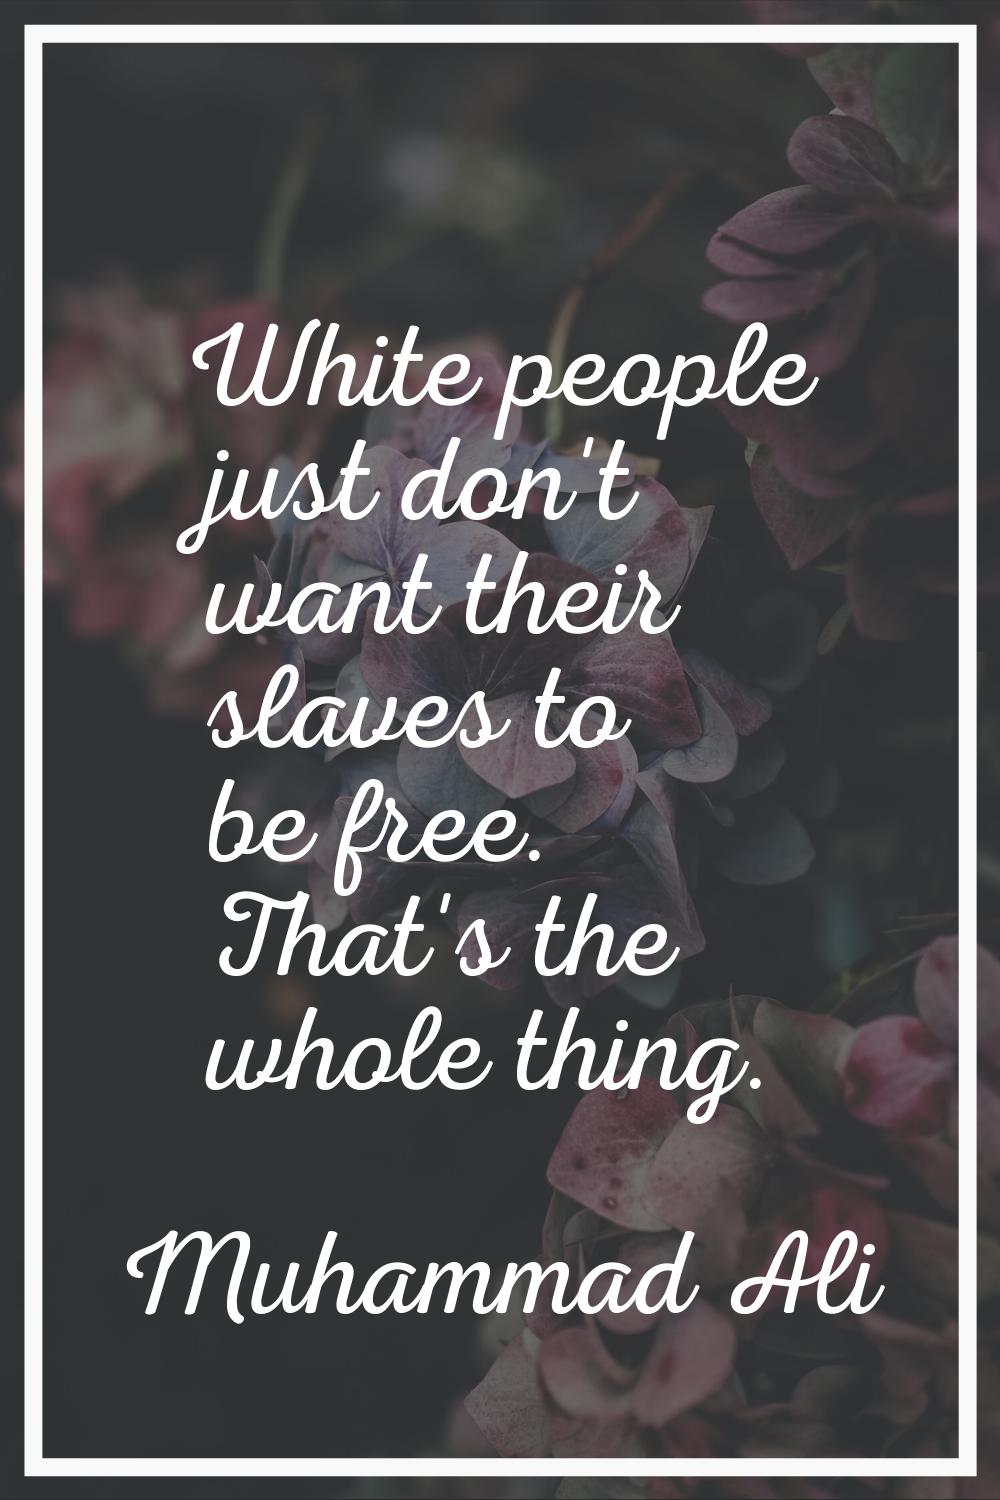 White people just don't want their slaves to be free. That's the whole thing.